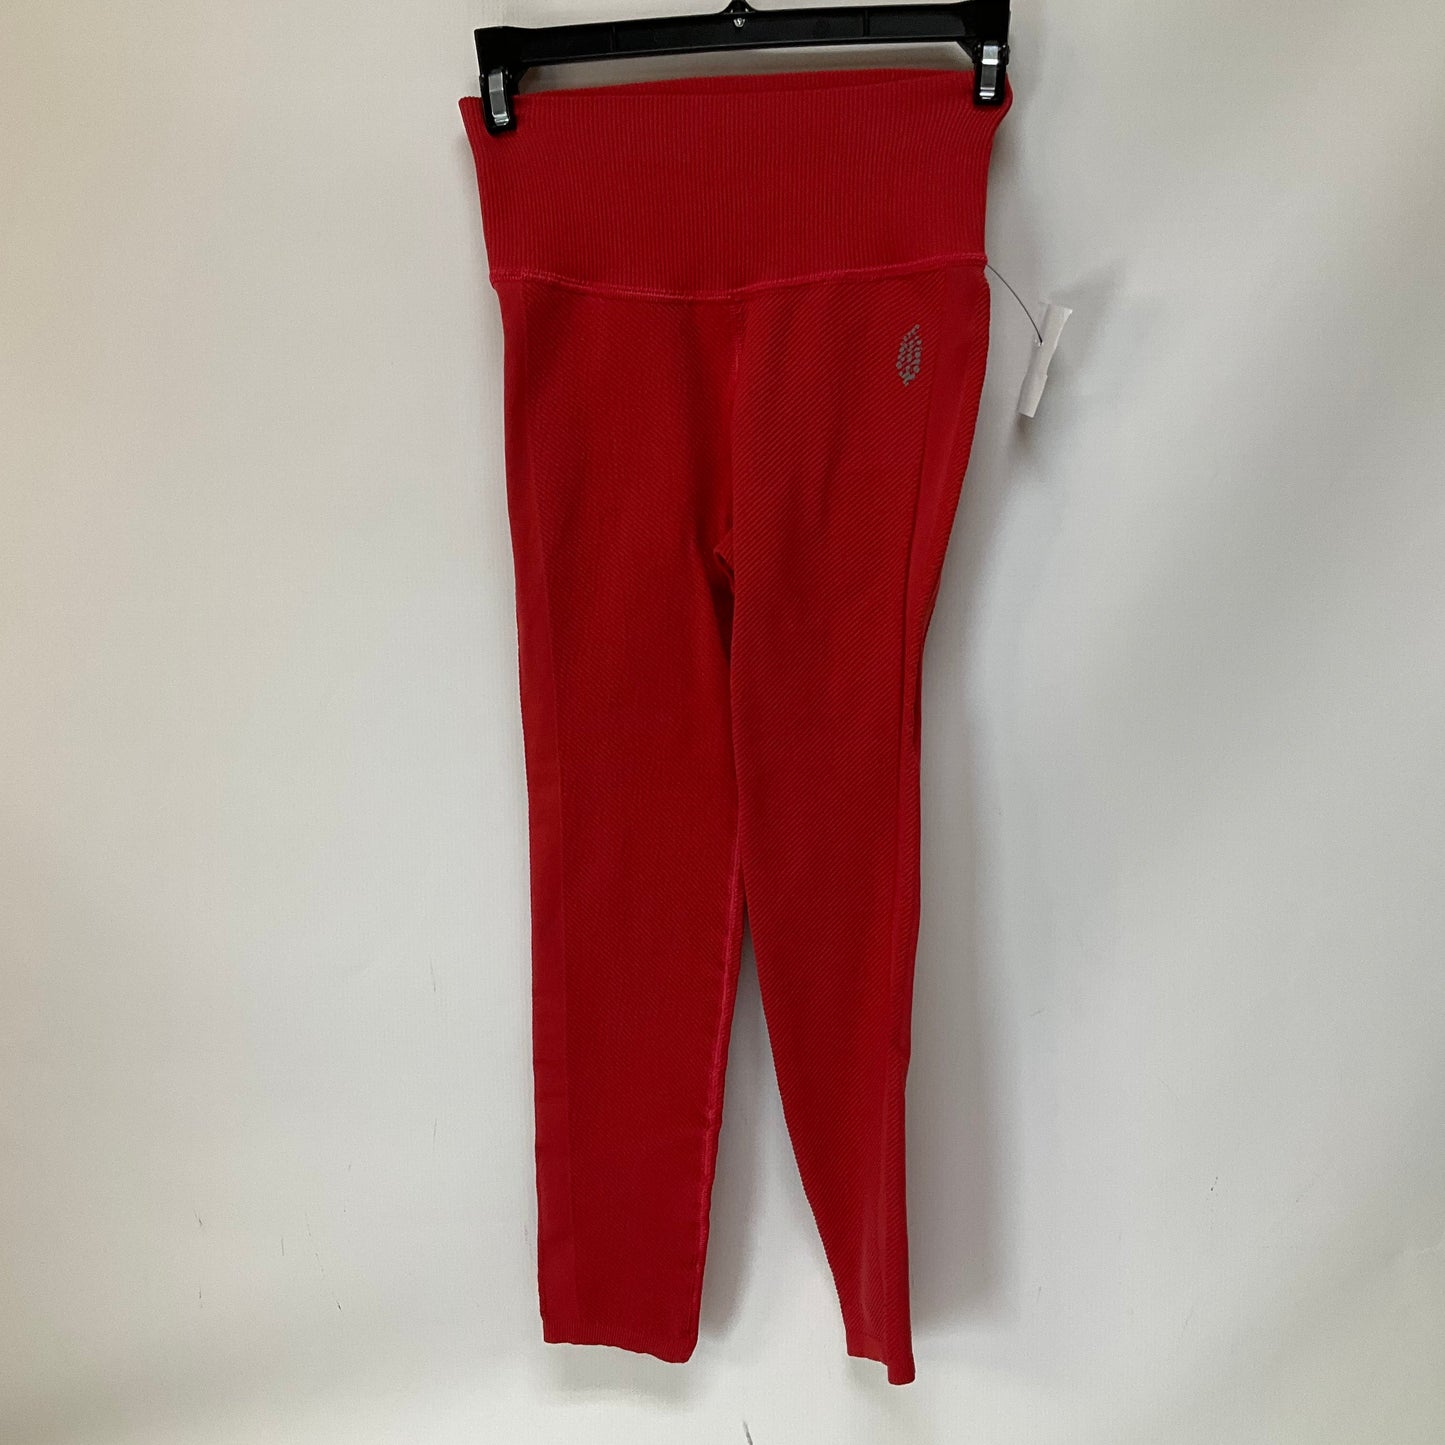 Red Athletic Leggings Free People, Size Xs